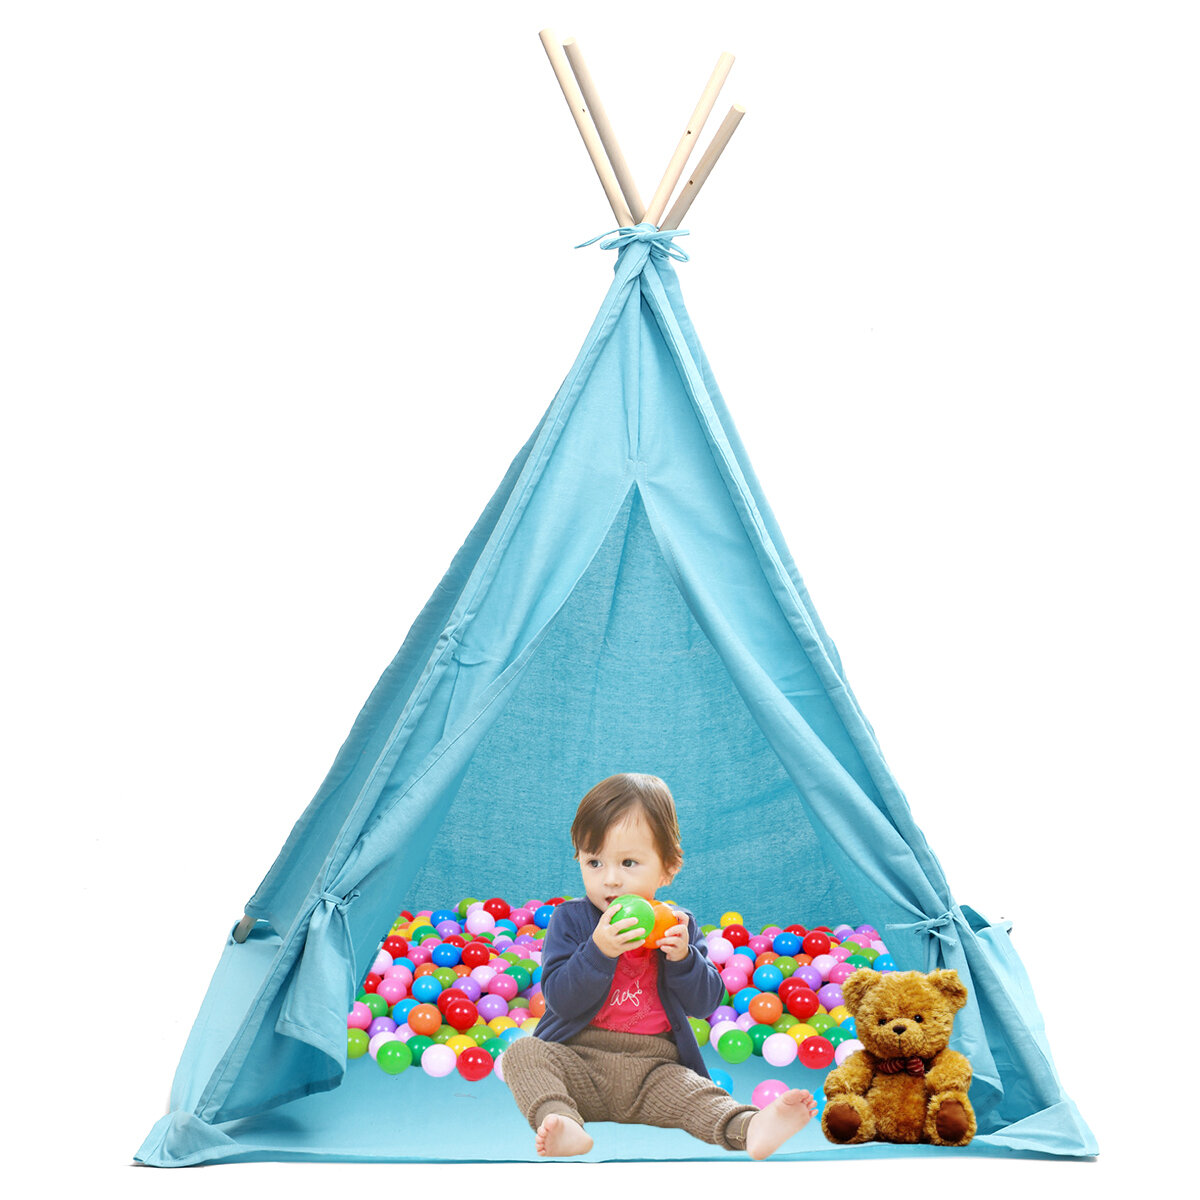 1.6/1.8M Kids Play Tents Cotton Canva Folding Indoor Outdoor Playhouse Triangle Indian Children Baby Game Funny House Wigwam Camping Tent